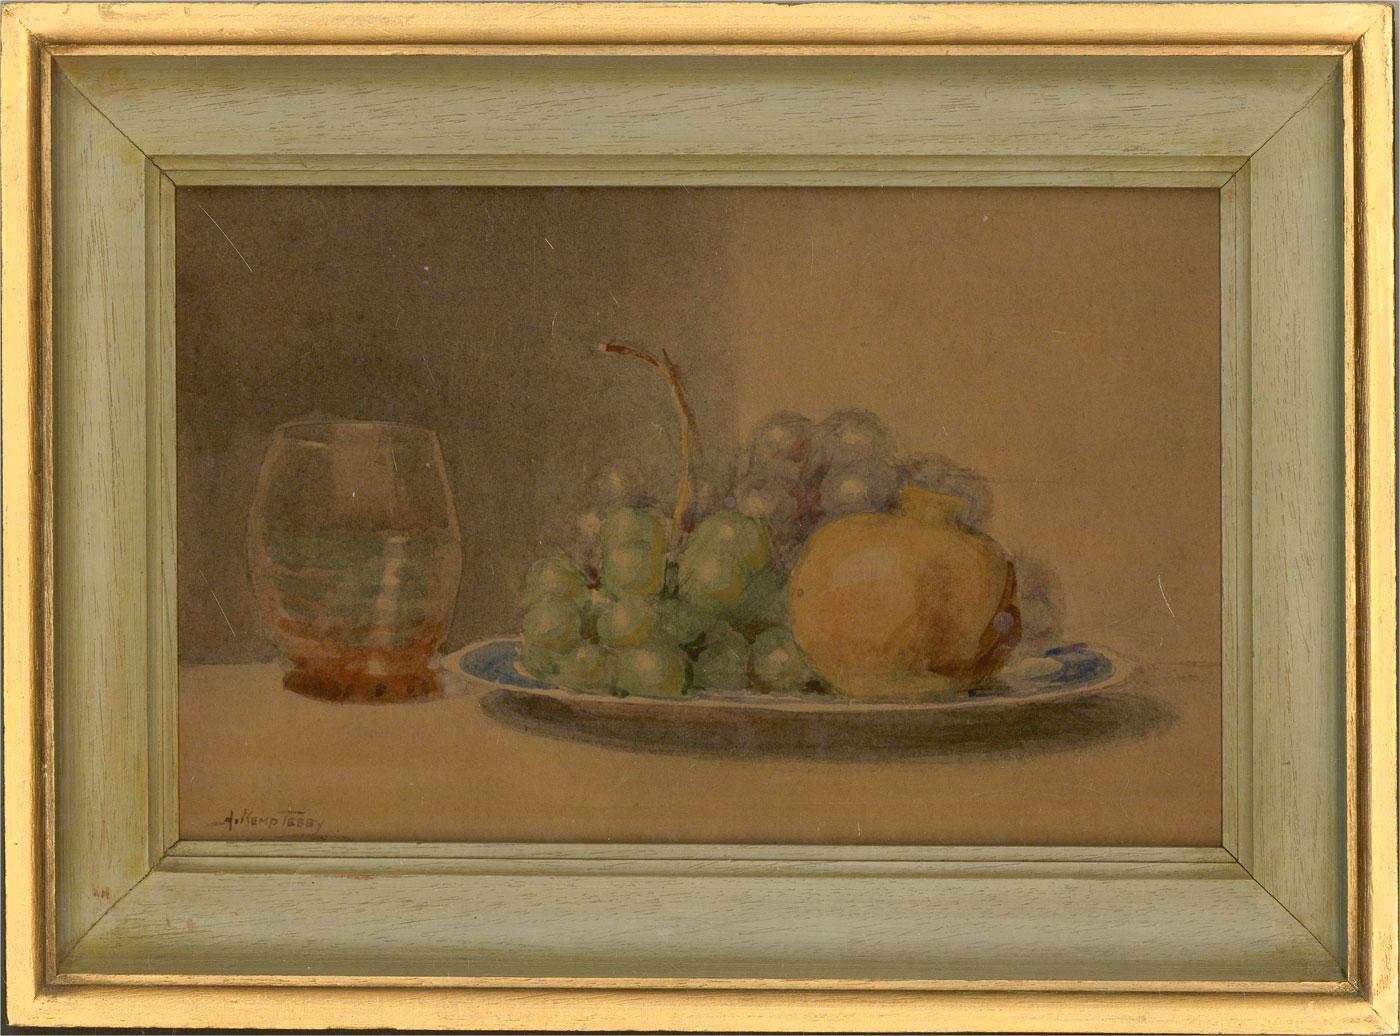 This delightful watercolour still life depicts a glass next to a plate of grapes with a ceramic vessel. Painted in a calming, subtle palette, the artist has has paid particular attention to portraying the soft lighting and the way it hits the